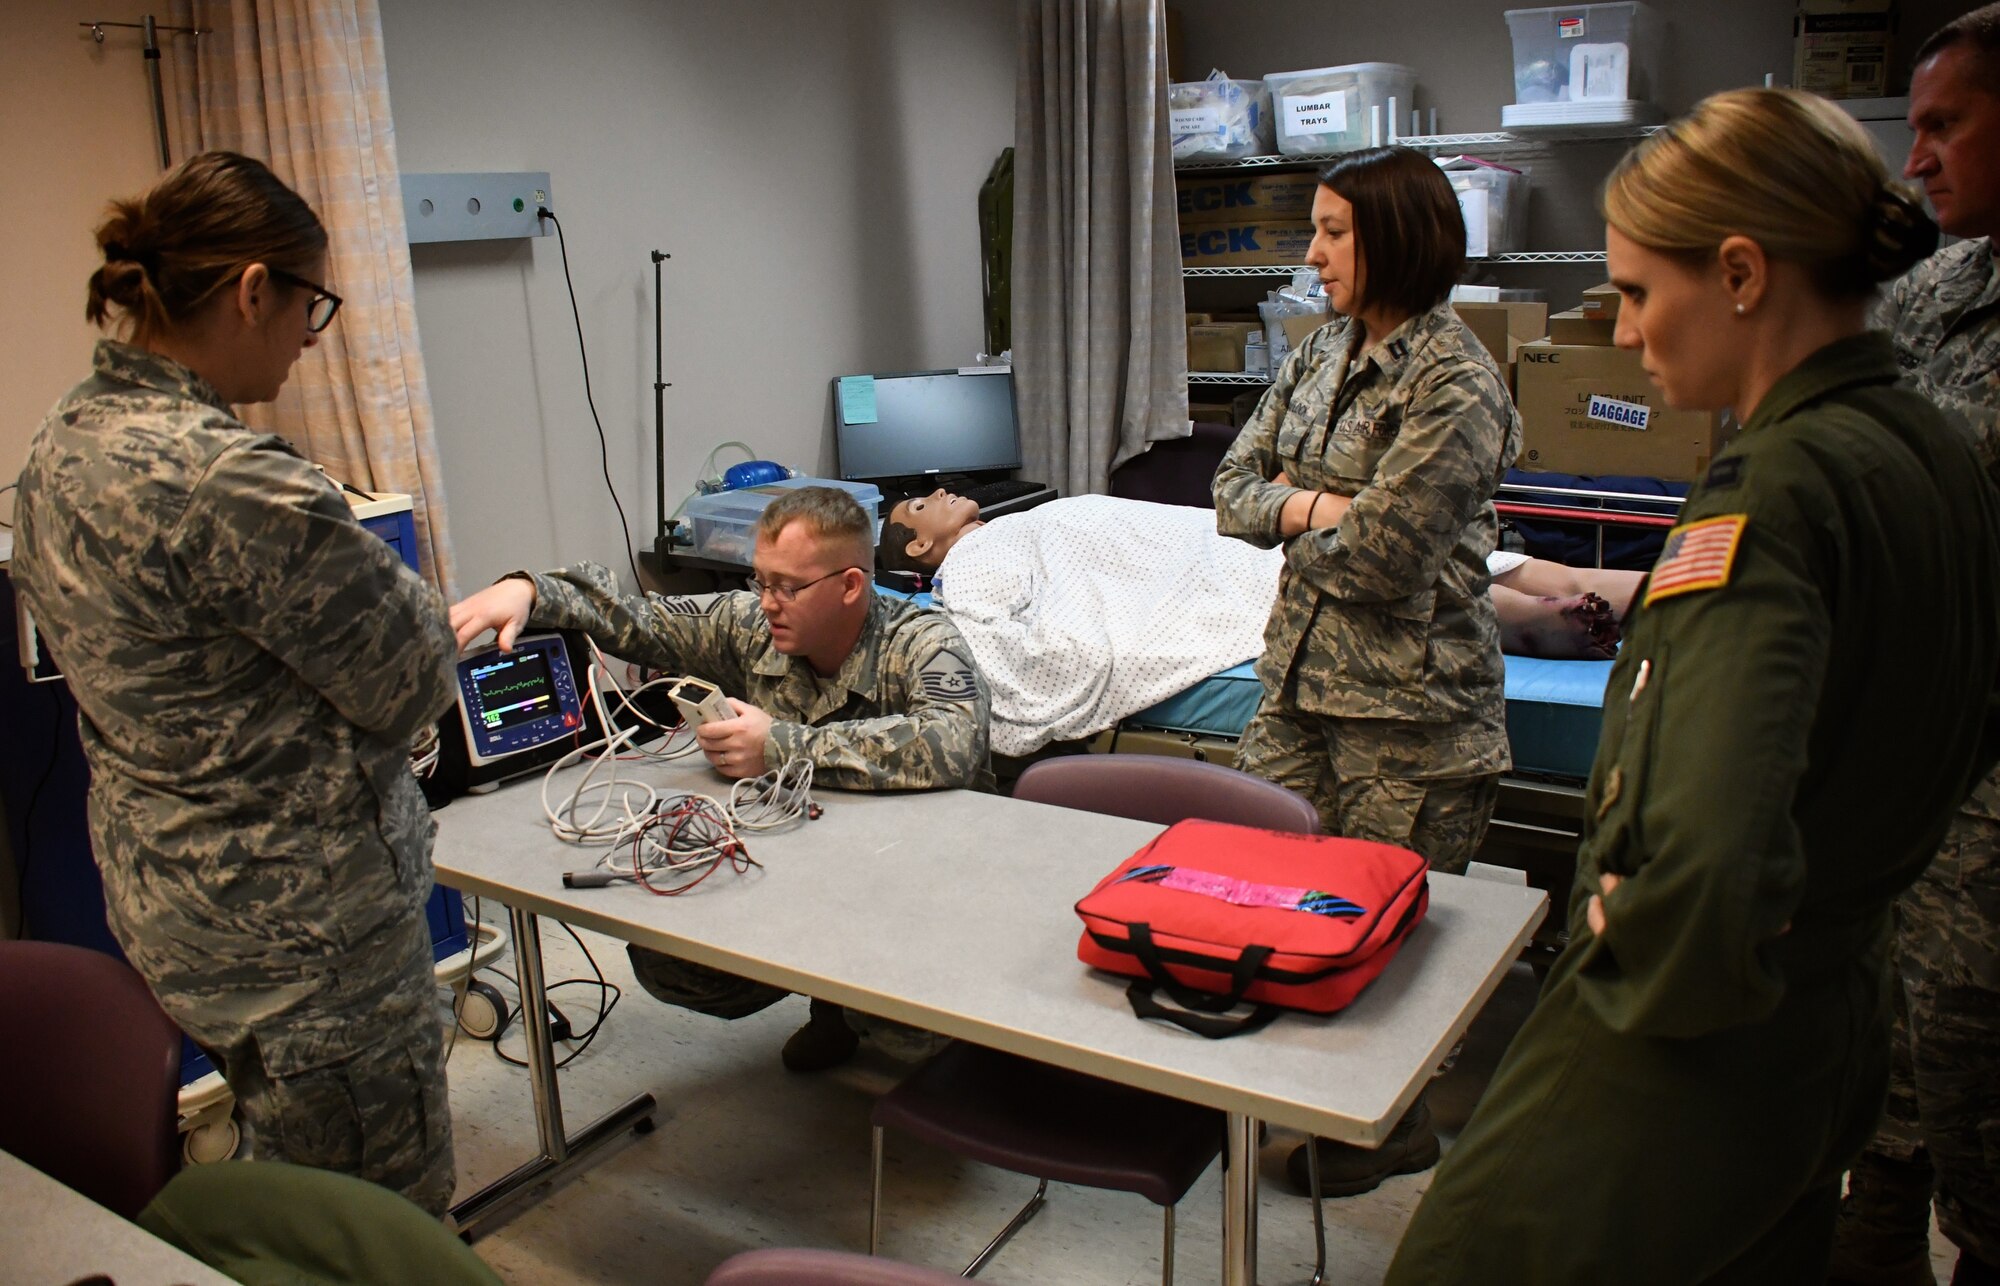 At center, Master Sgt. Thomas Dissette, 932nd Airlift Wing, 932nd Medical Group, 932nd Aeromedical Staging Squadron, teaches a class on taking care of critically ill patients recently at Scott Air Force Base, Ill.  He works through the steps required to use a piece of equipment called the "Propaq", which helps monitor his simulated robotic patient, also known as "simulation man" (in background).  The Propaq MD offers multiple display modes to operate in bright sunlight or during night missions (NVG-friendly display). The battery system and AC power charger provide worldwide sea, land, and air operating capabilities for the rugged device.  (U.S. Air Force photo by Lt. Col. Stan Paregien)